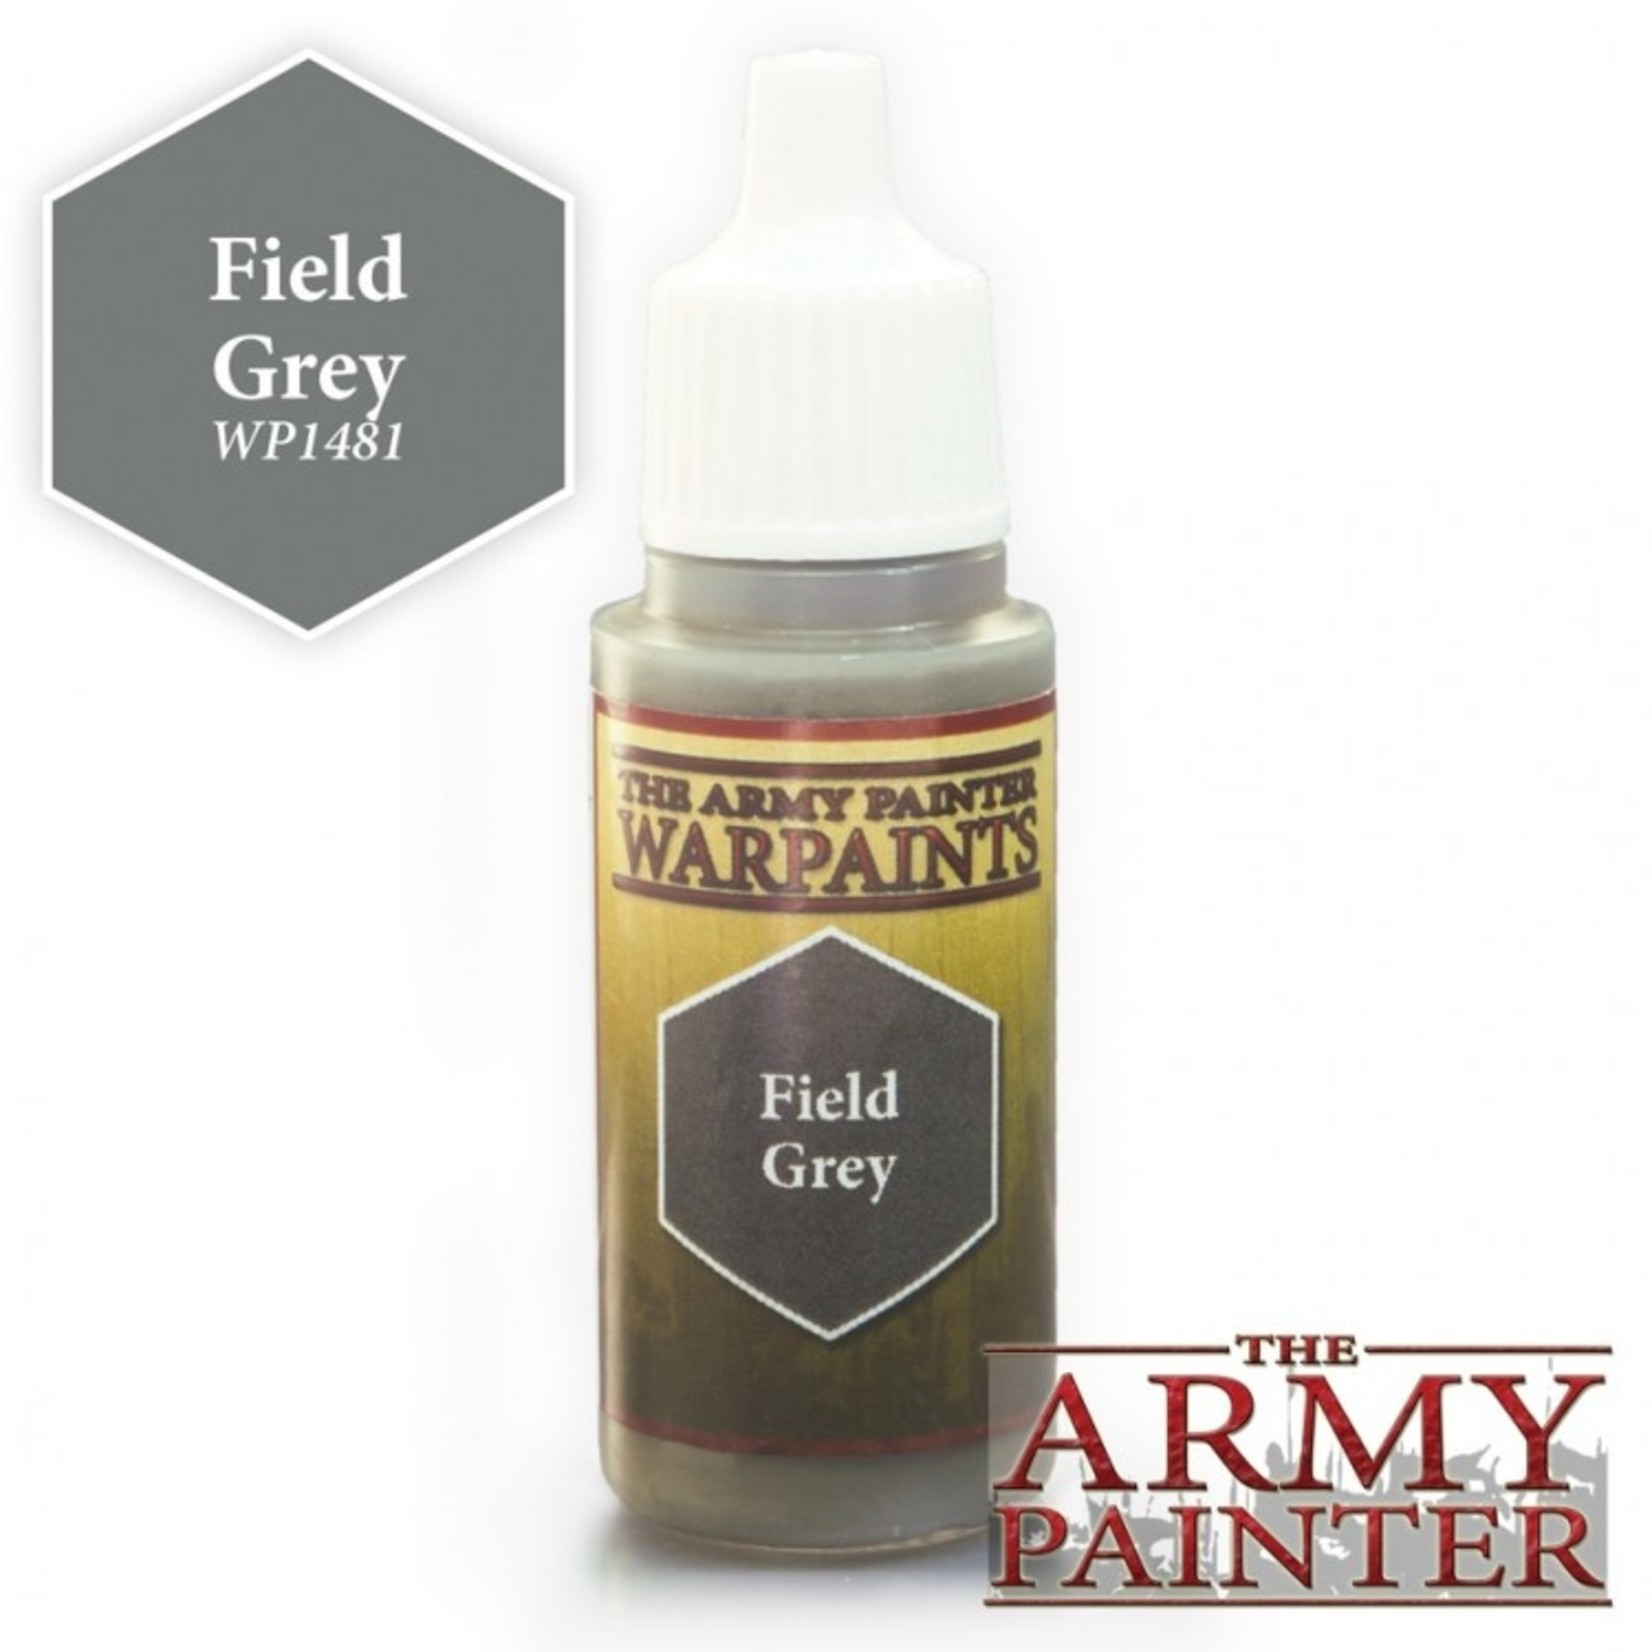 The Army Painter The Army Painter Field Grey 18ml